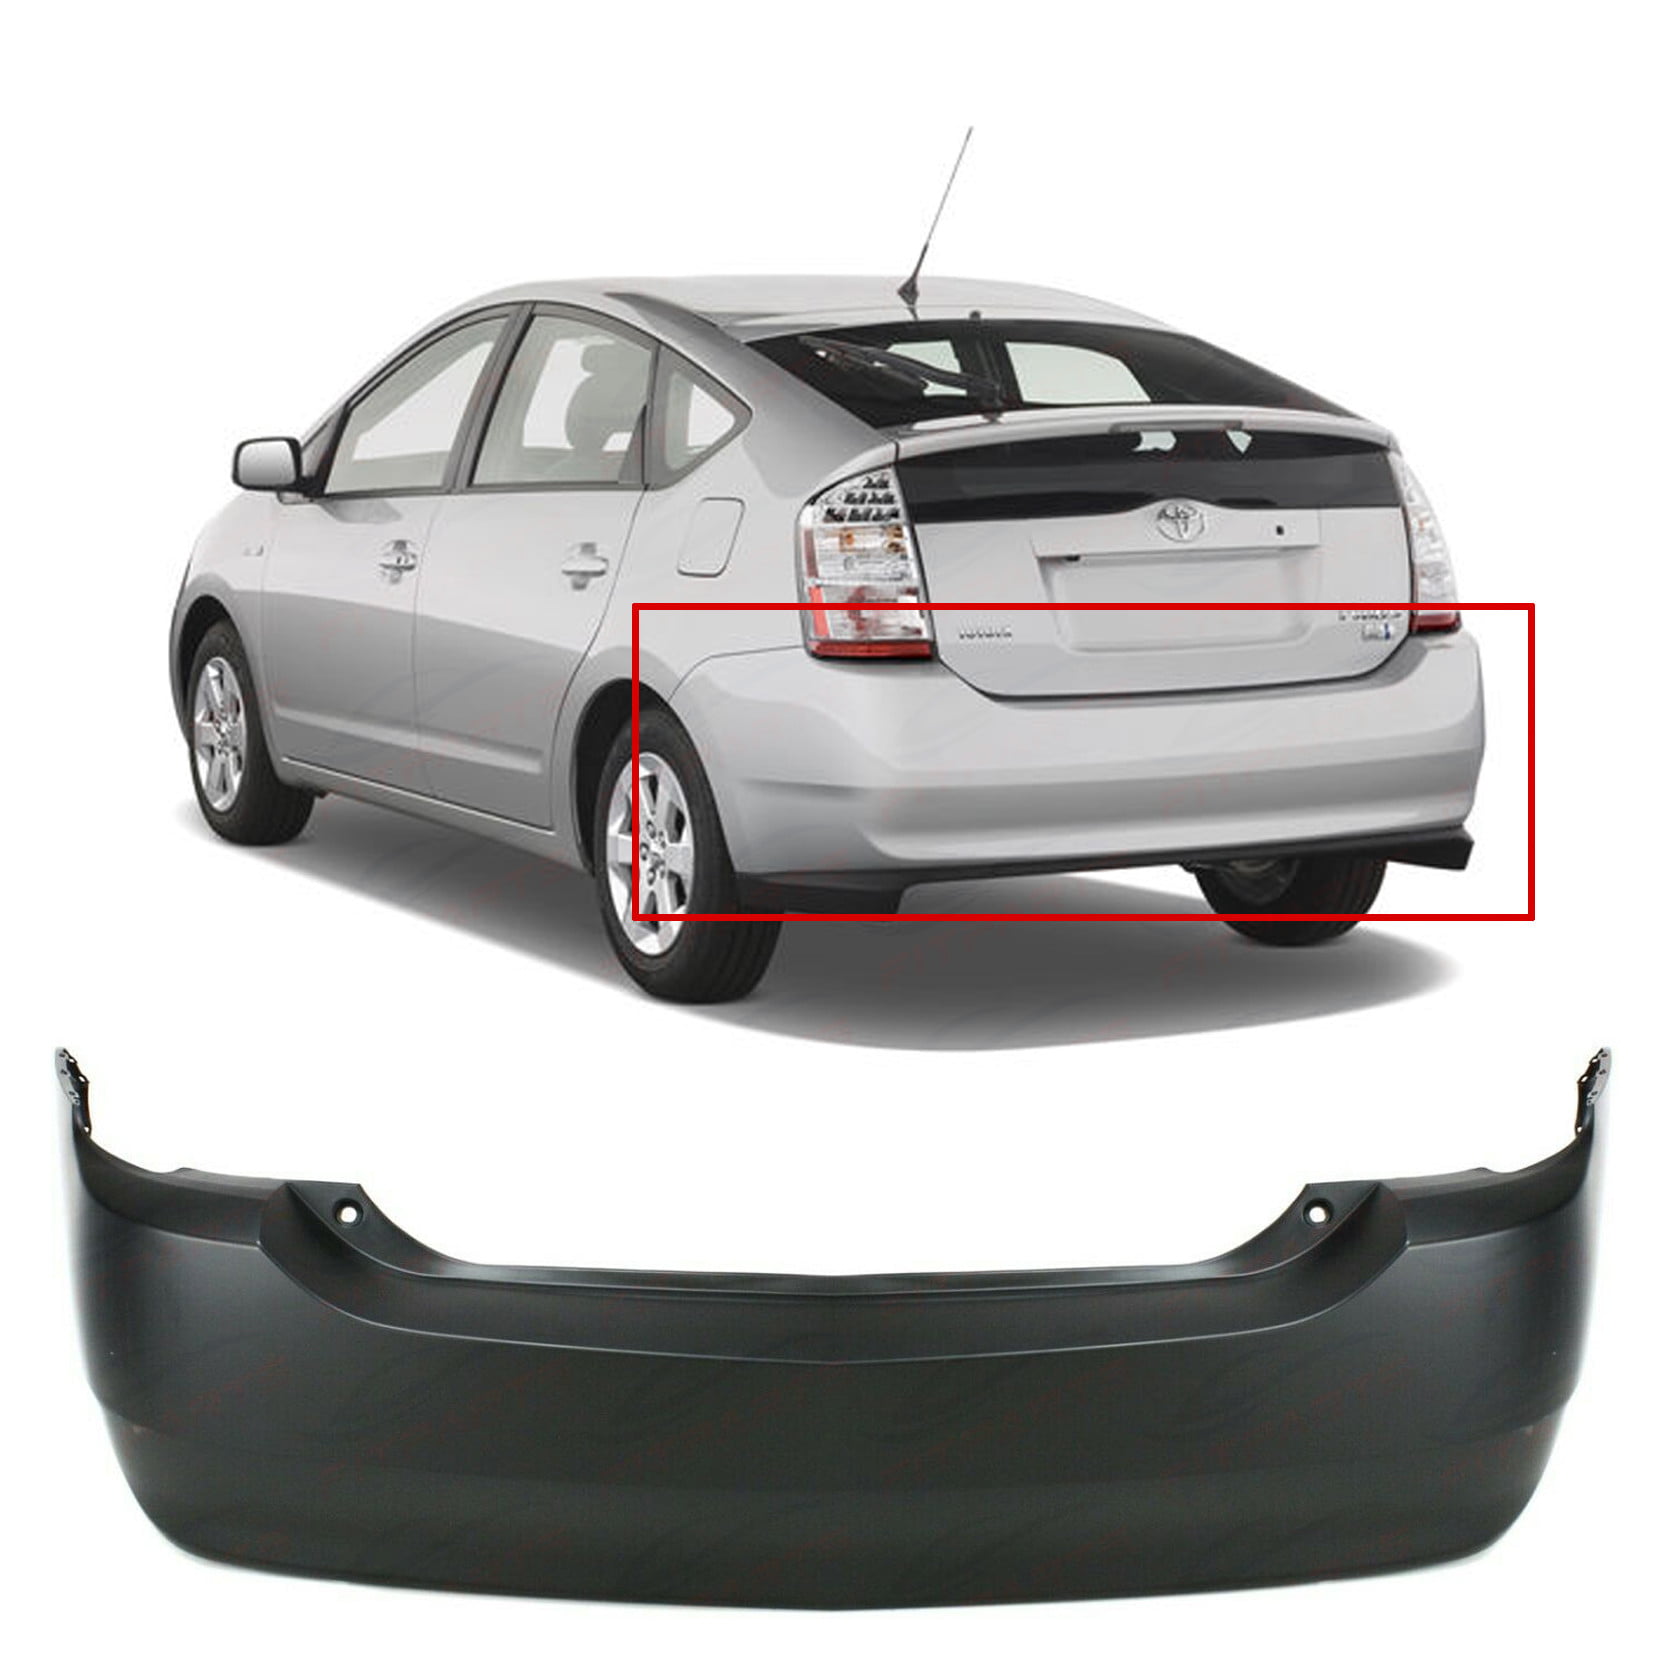 Bumper Cover Set of 2 Compatible with Toyota Prius 2004-2009 Front and Rear Primed